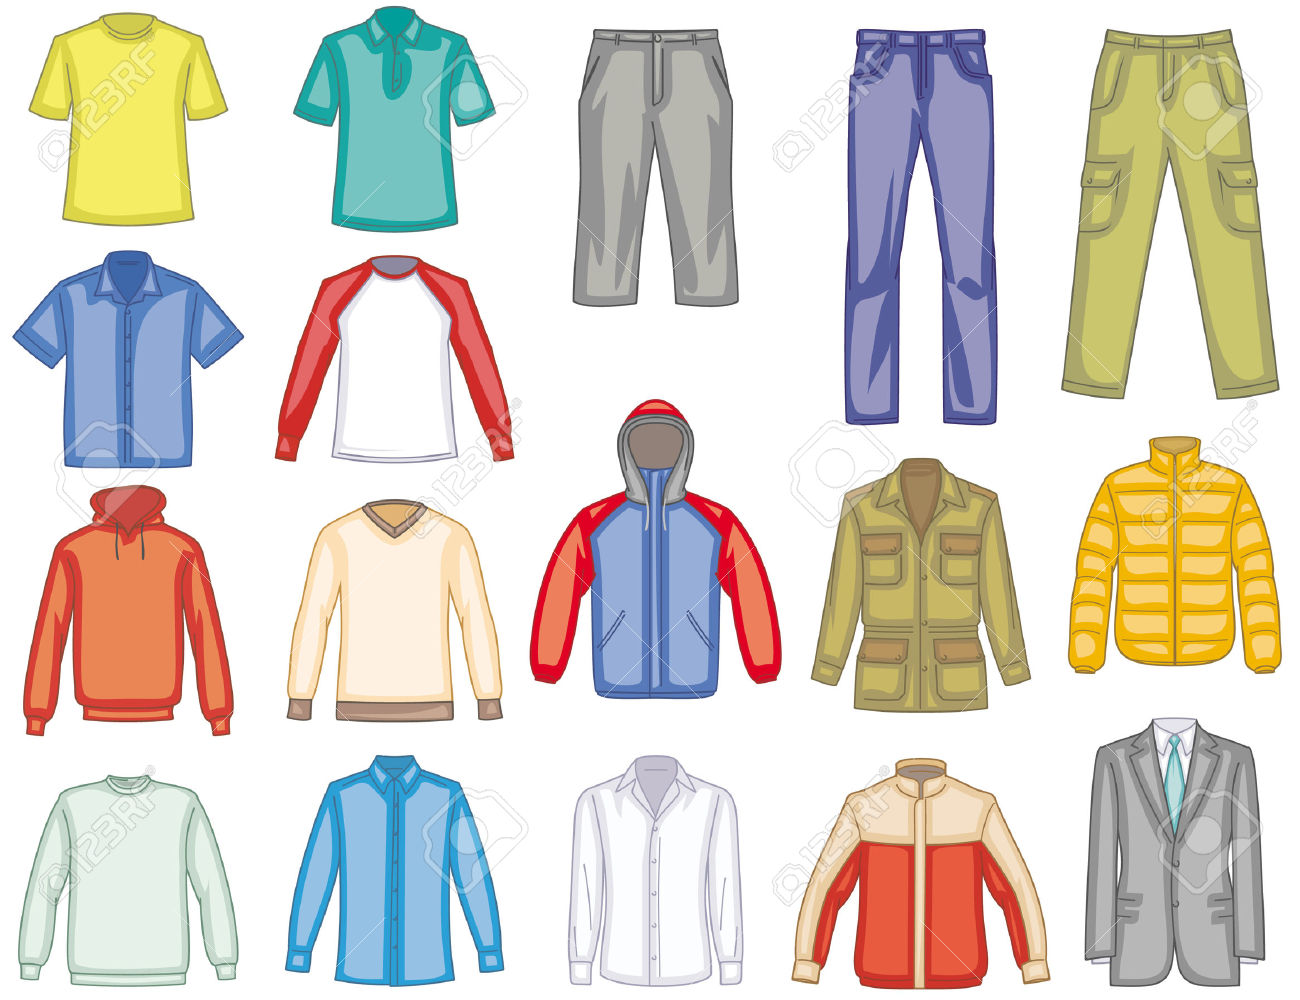 Men's clothing clipart Clipground